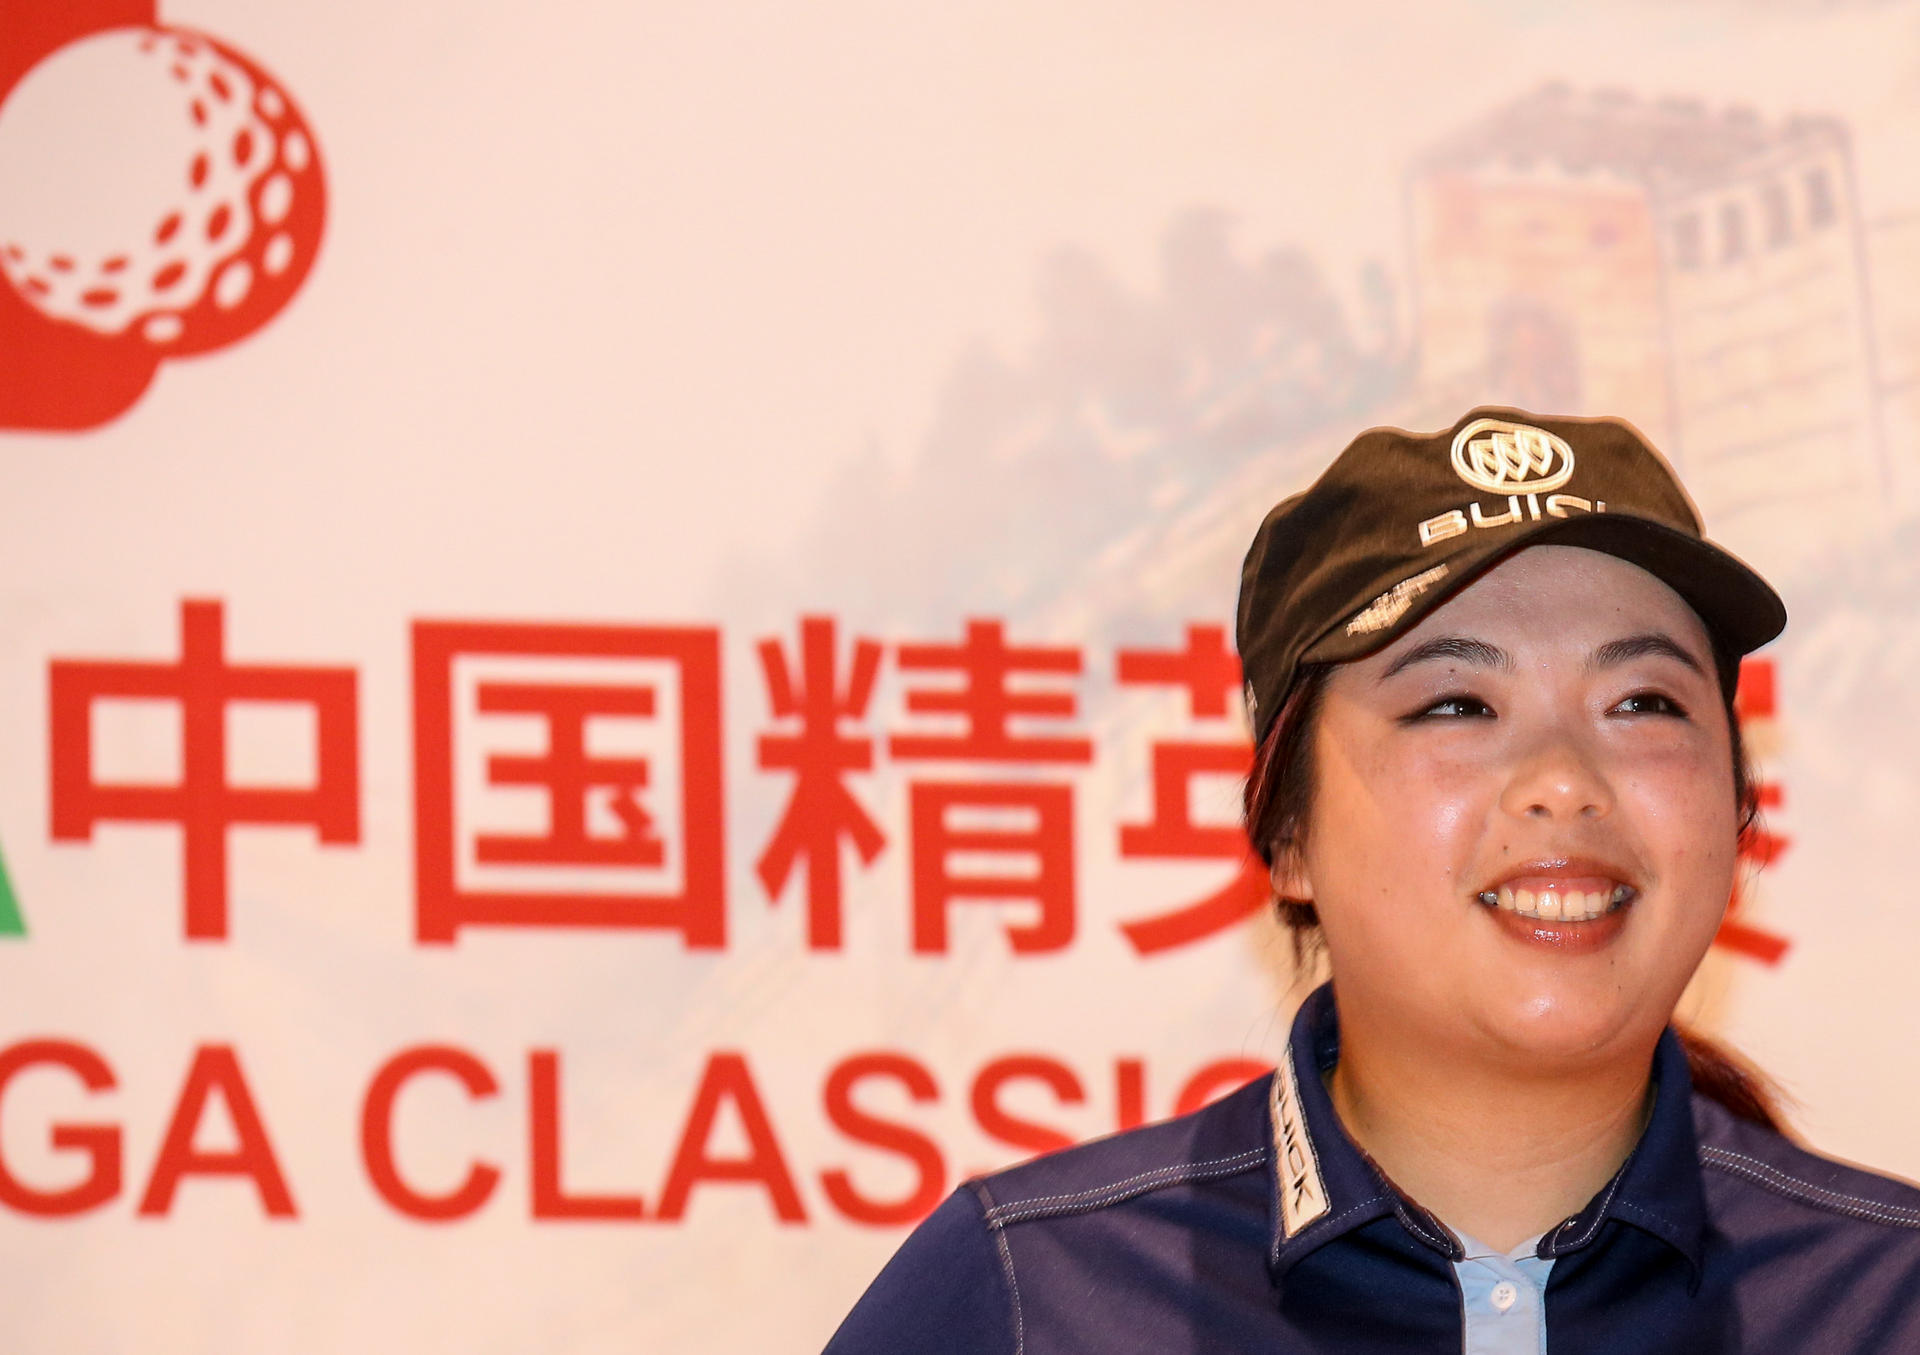 Feng Shanshan will be aiming to make it two wins from two at the Reignwood LPGA Classic at pine Valley Golf Club this week. Photo: Xinhua